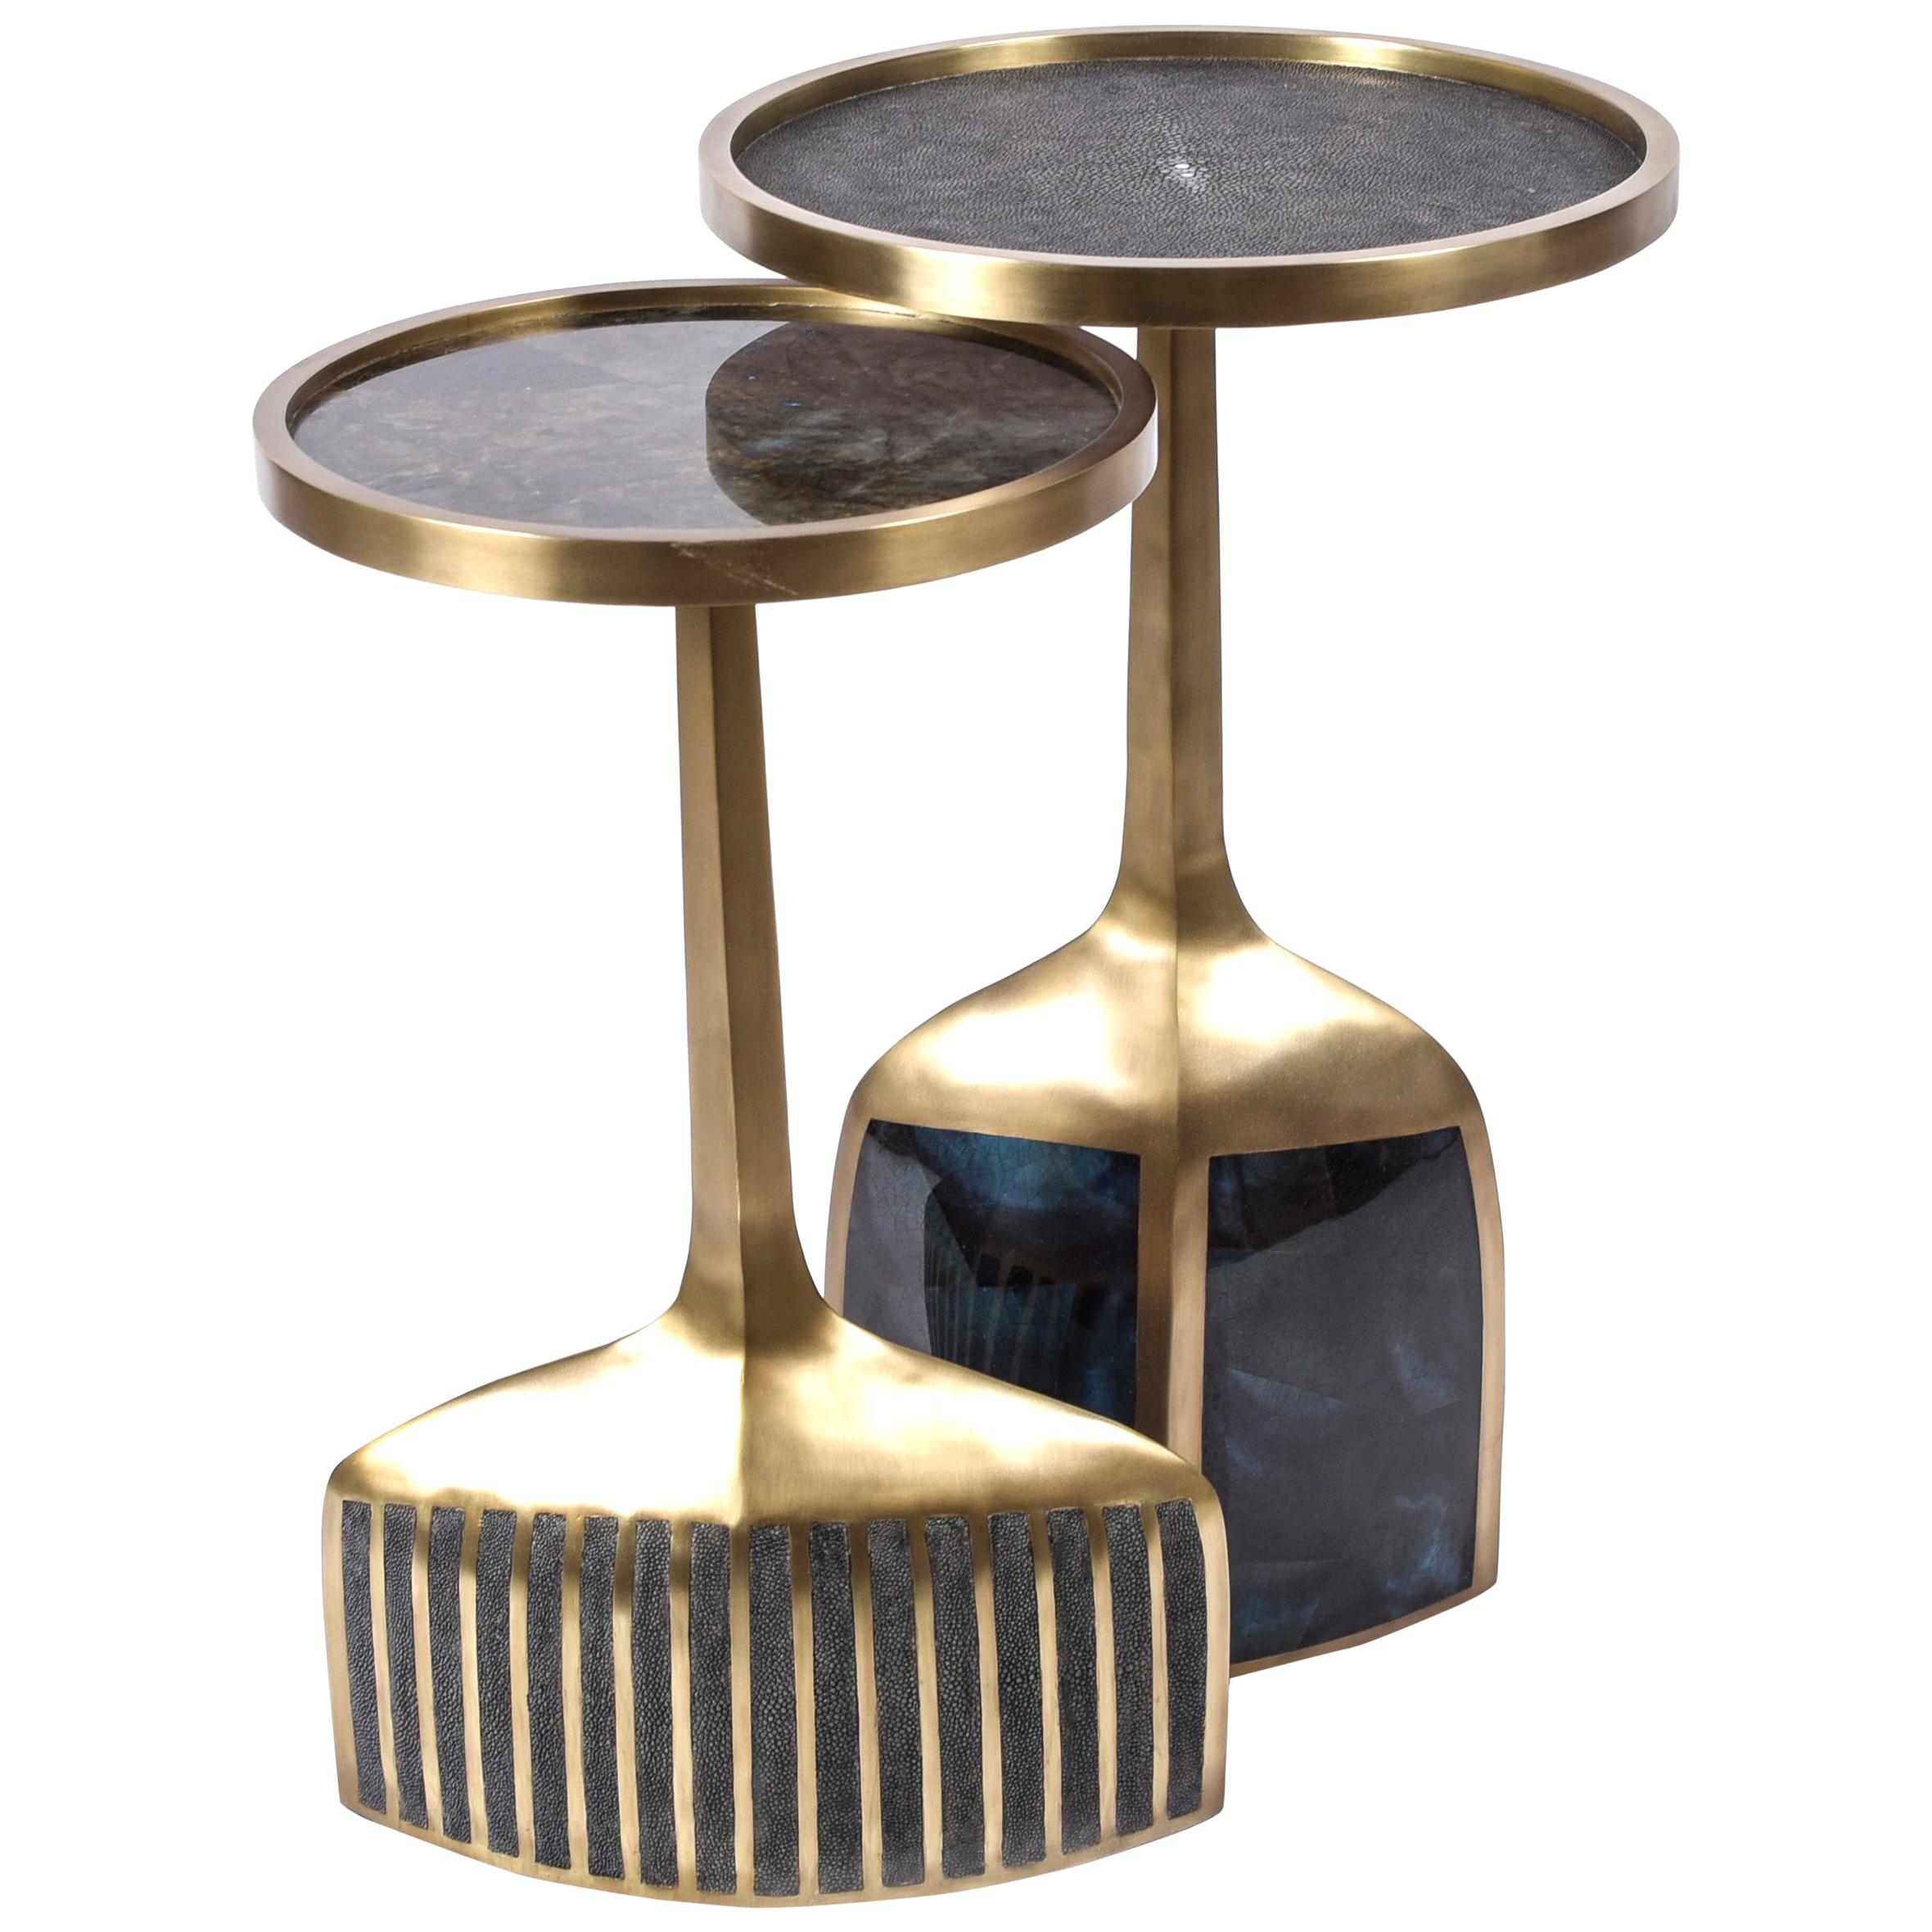 Set of 2 Pedestal Tables in Shagreen, Shell, Lemurian and Brass by R&Y Augousti